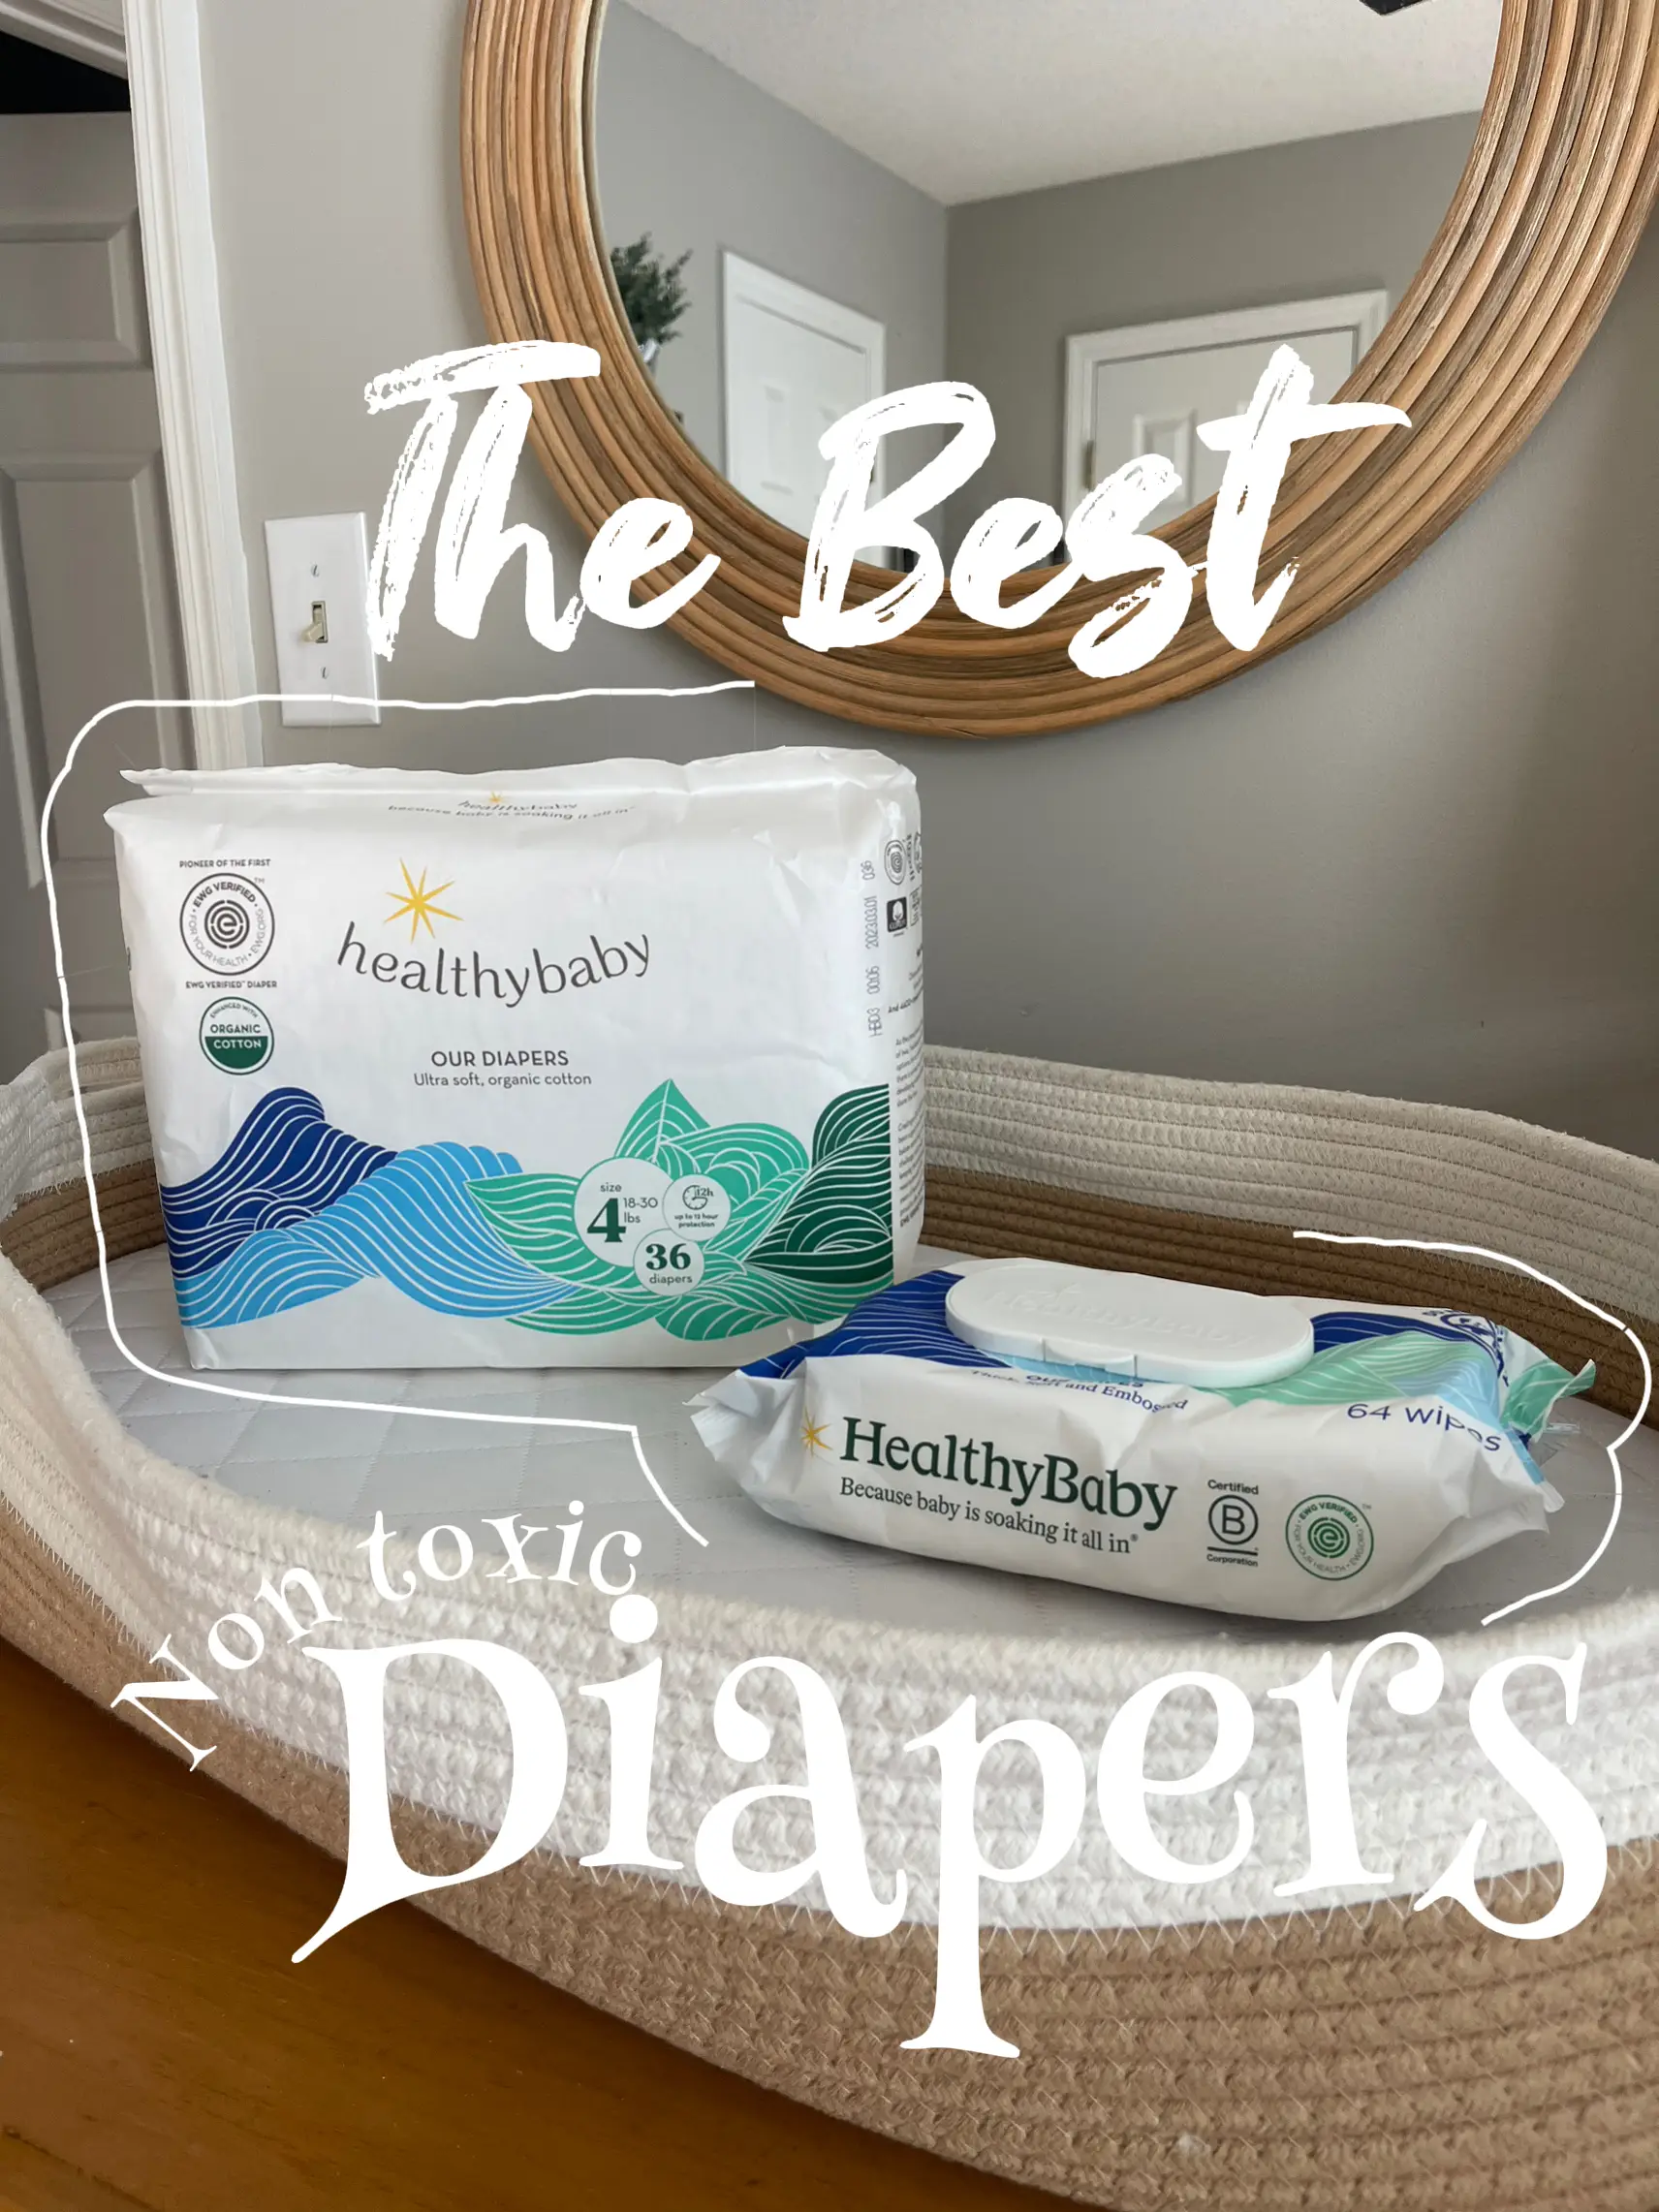 Our Swim Diaper - Healthybaby